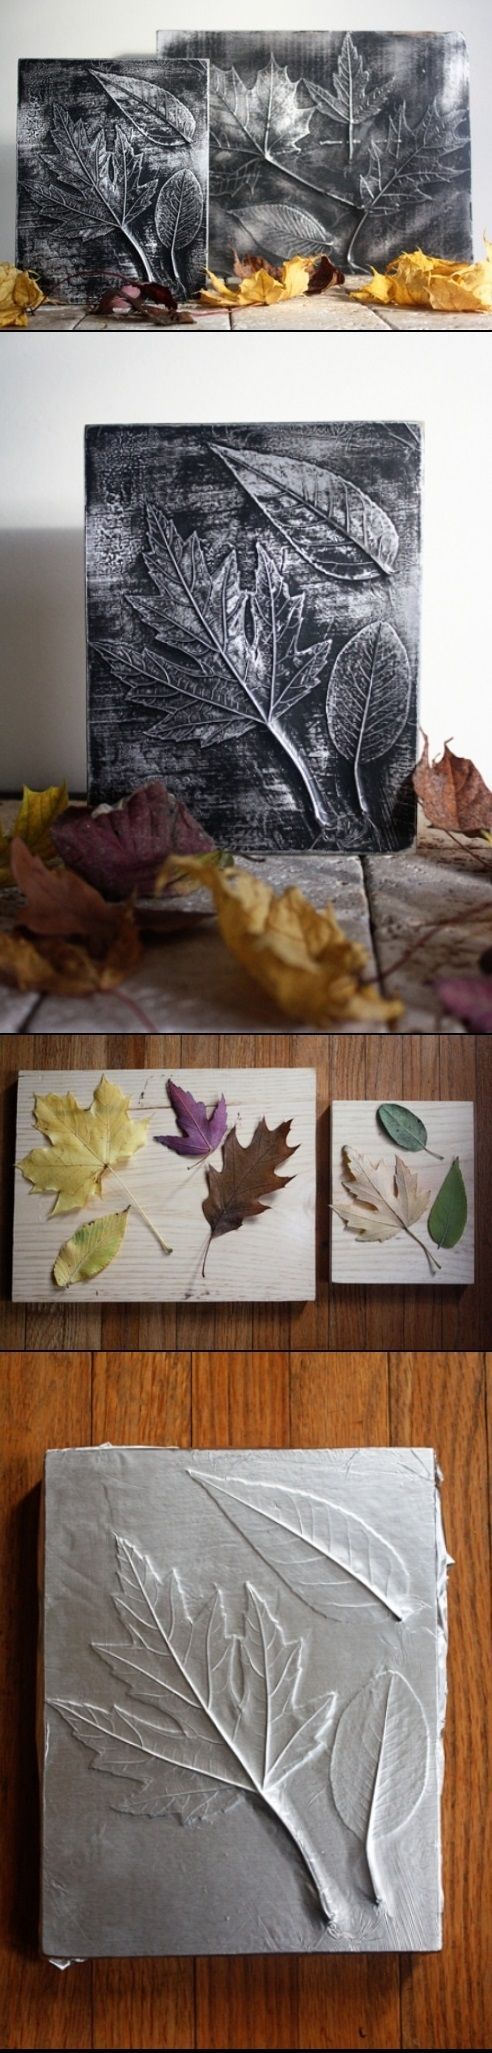 DIY Leaf Decor – DIY Picture. These are so cool!